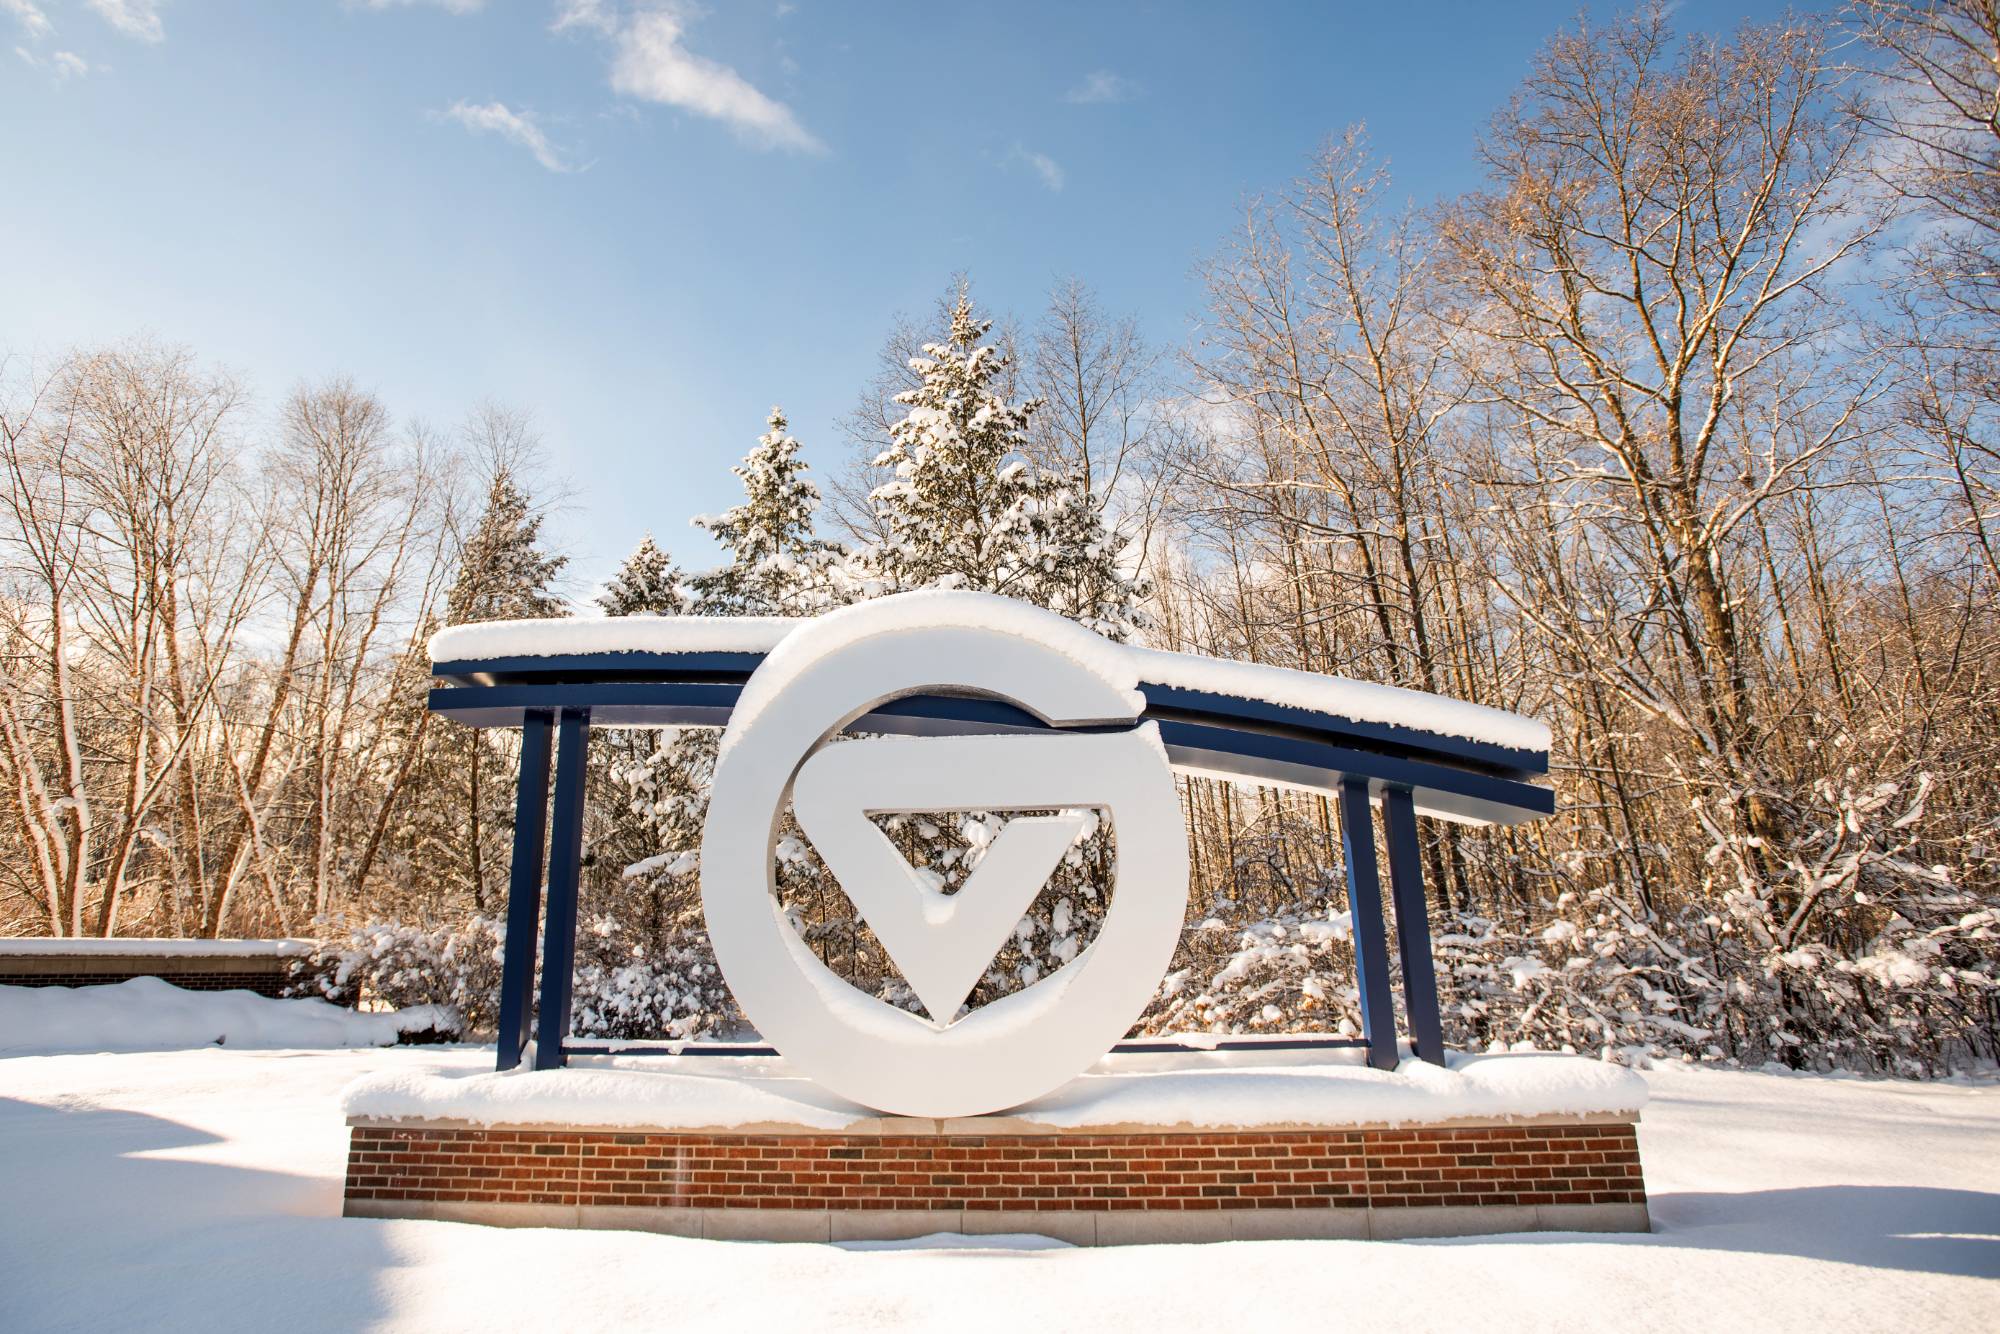 The sign at the entrance to GVSU's Allendale Campus on a snowy, sunny day.